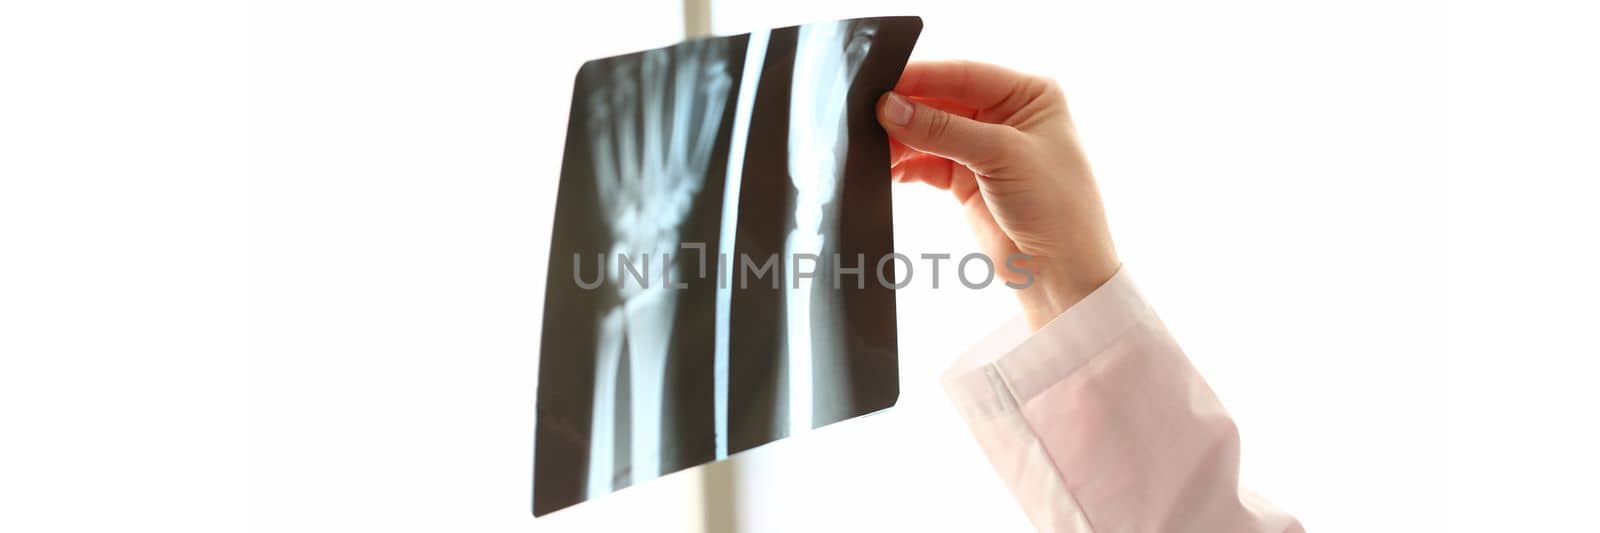 Orthopedic doctor examines image of hands on x-ray by kuprevich